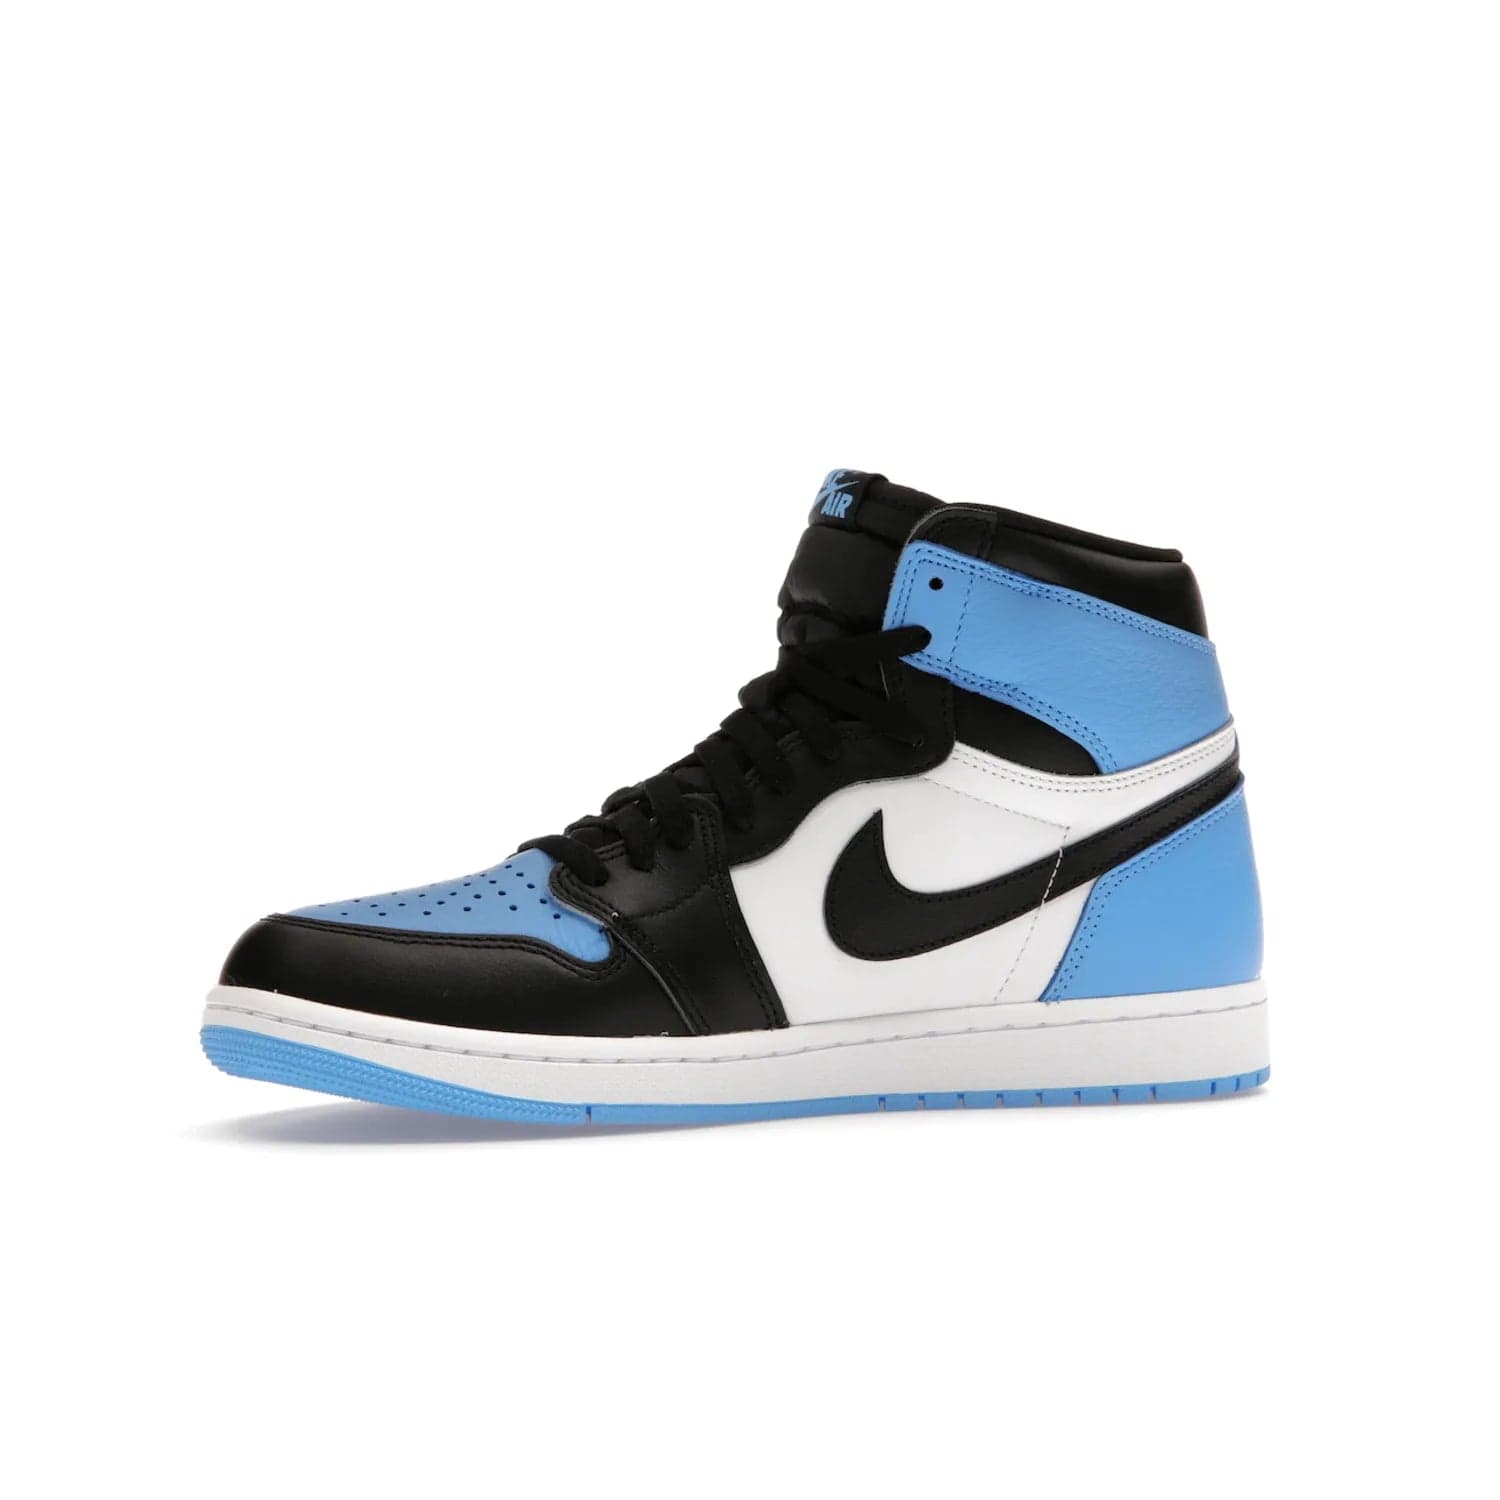 Jordan 1 Retro High OG UNC Toe - Image 17 - Only at www.BallersClubKickz.com - Jordan 1 High OG UNC Toe is a fashionable, high-quality sneaker featuring University Blue, Black White and White. Releasing July 22, 2023, it's the perfect pick up for sneakerheads.